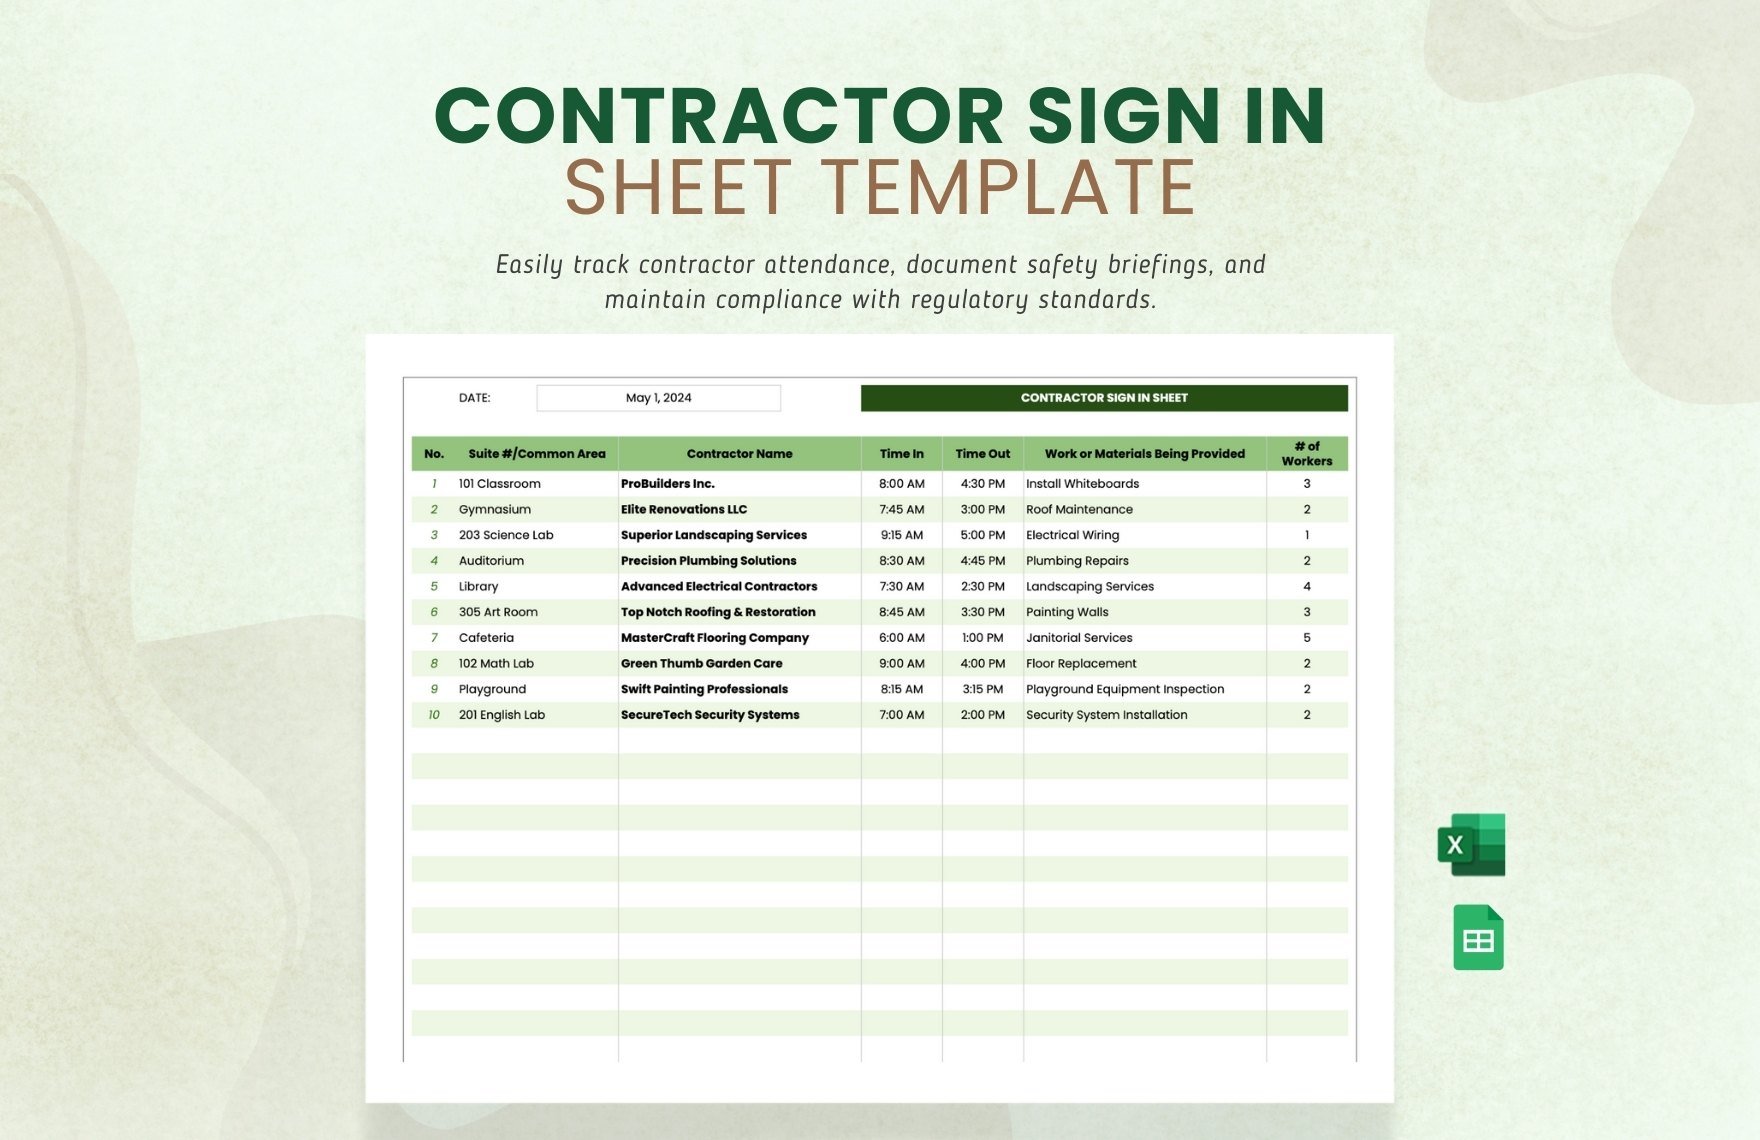 Contractor Sign in Sheet Template